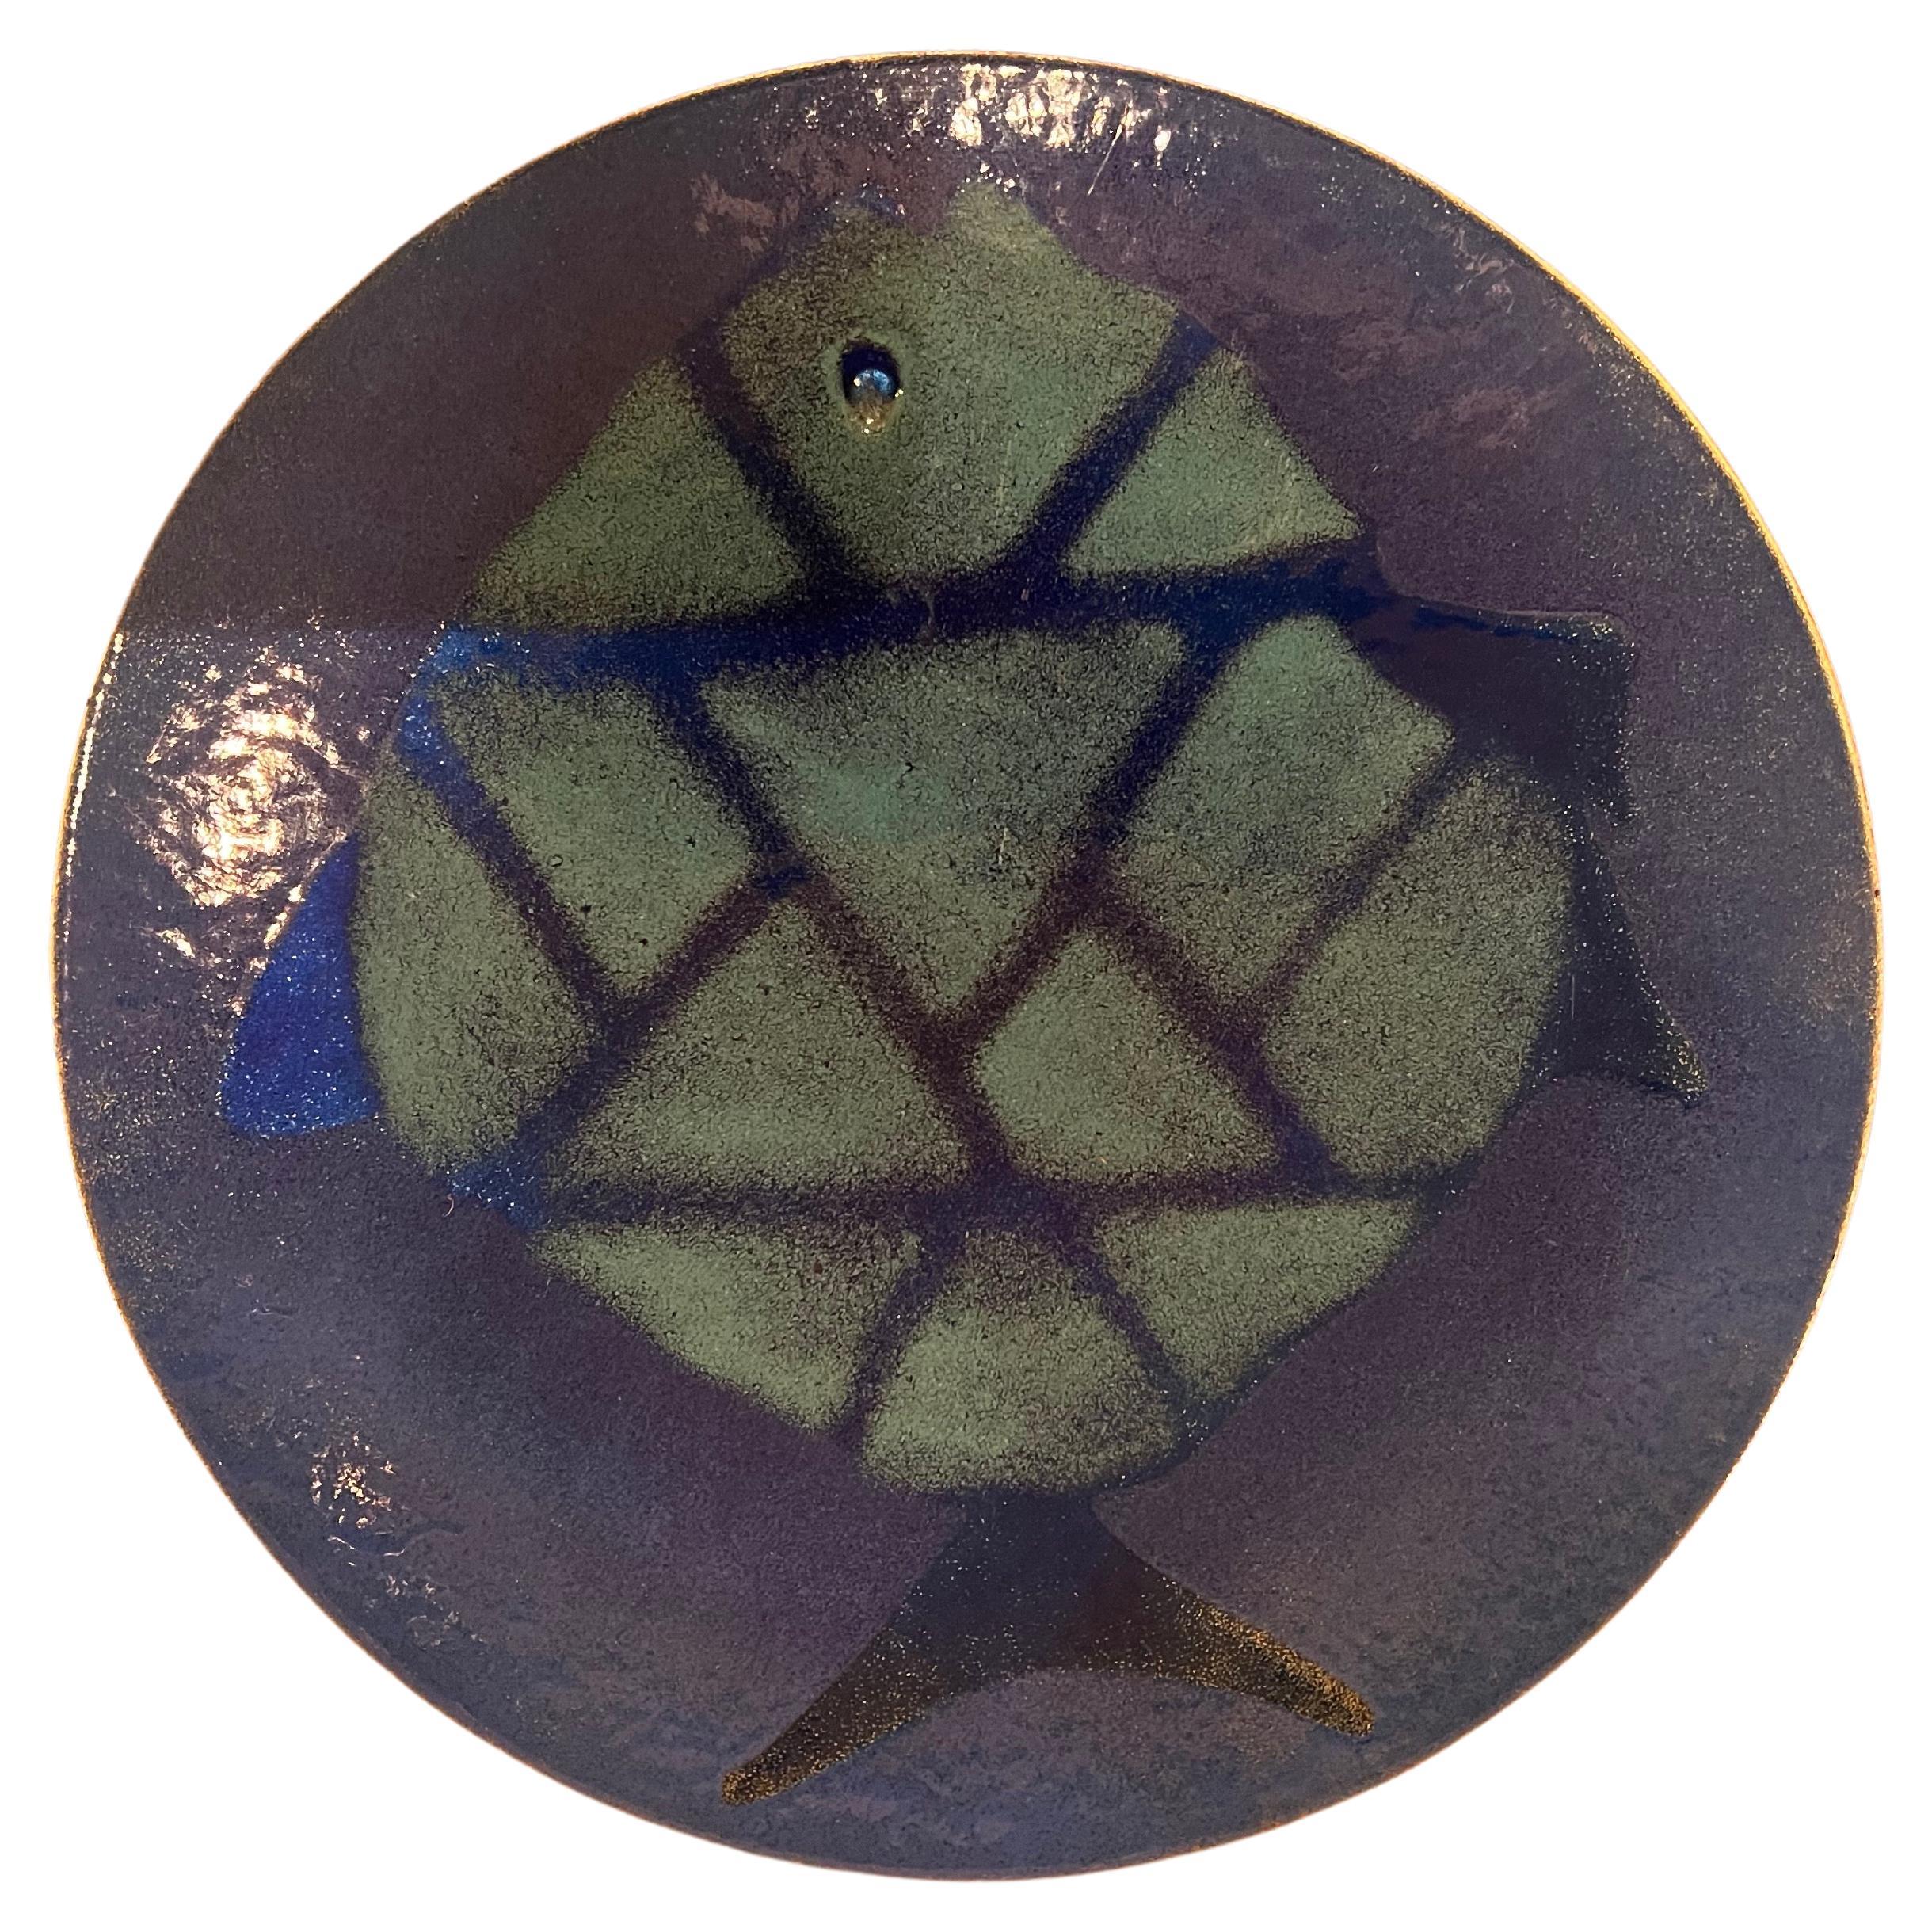 Beautiful enameled on copper bowl plate with nice blue tones colors , and beautiful fish design in excellent condition , no chips or cracks great for any mid century , Danish modern home decor.